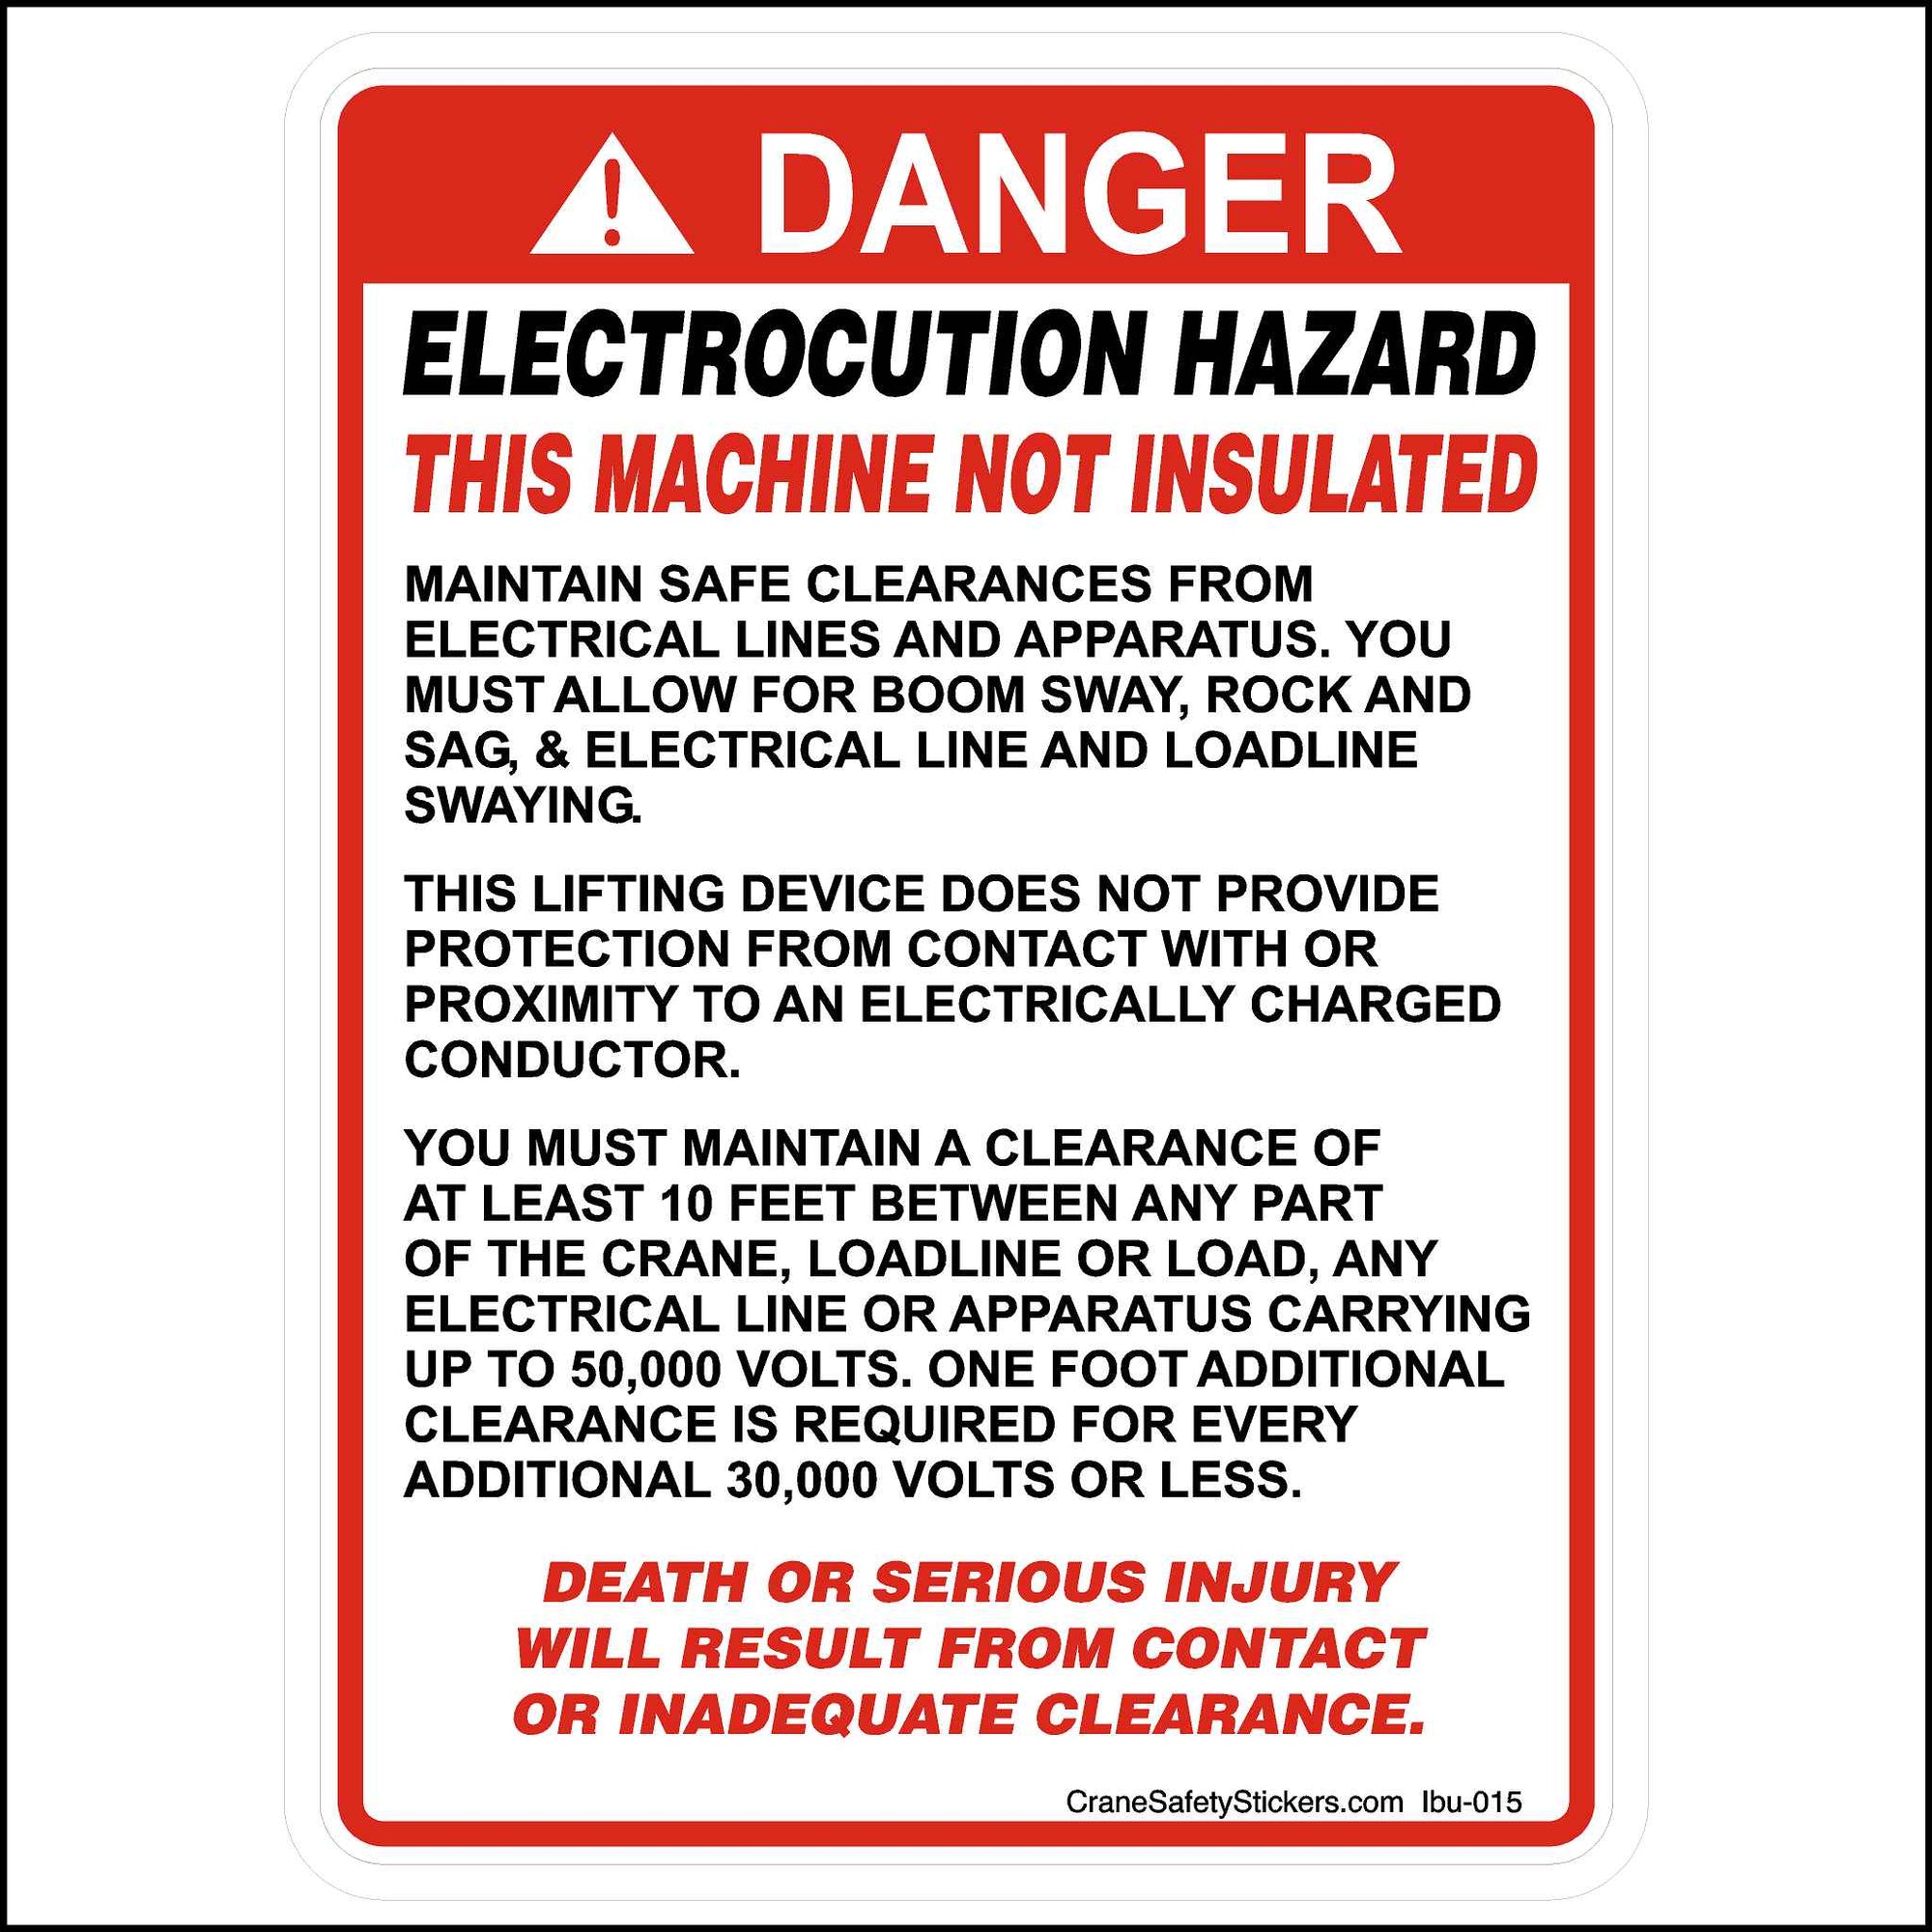 Safe Clearances From Electrical Lines Boom Sway Rock and Sag Sticker is Printed With. DANGER! ELECTROCUTION HAZARD THIS MACHINE NOT INSULATED MAINTAIN SAFE CLEARANCES FROM ELECTRICAL LINES AND APPARATUS. YOU MUST ALLOW FOR BOOM SWAY, ROCK, AND SAG, & ELECTRICAL LINE AND LOADLINE SWAYING. THIS LIFTING DEVICE DOES NOT PROVIDE PROTECTION FROM CONTACT WITH OR PROXIMITY TO AN ELECTRICALLY CHARGED CONDUCTOR. YOU MUST MAINTAIN A CLEARANCE OF AT LEAST 10 FEET BETWEEN ANY PART OF THE CRANE, LOADLINE OR LOAD.